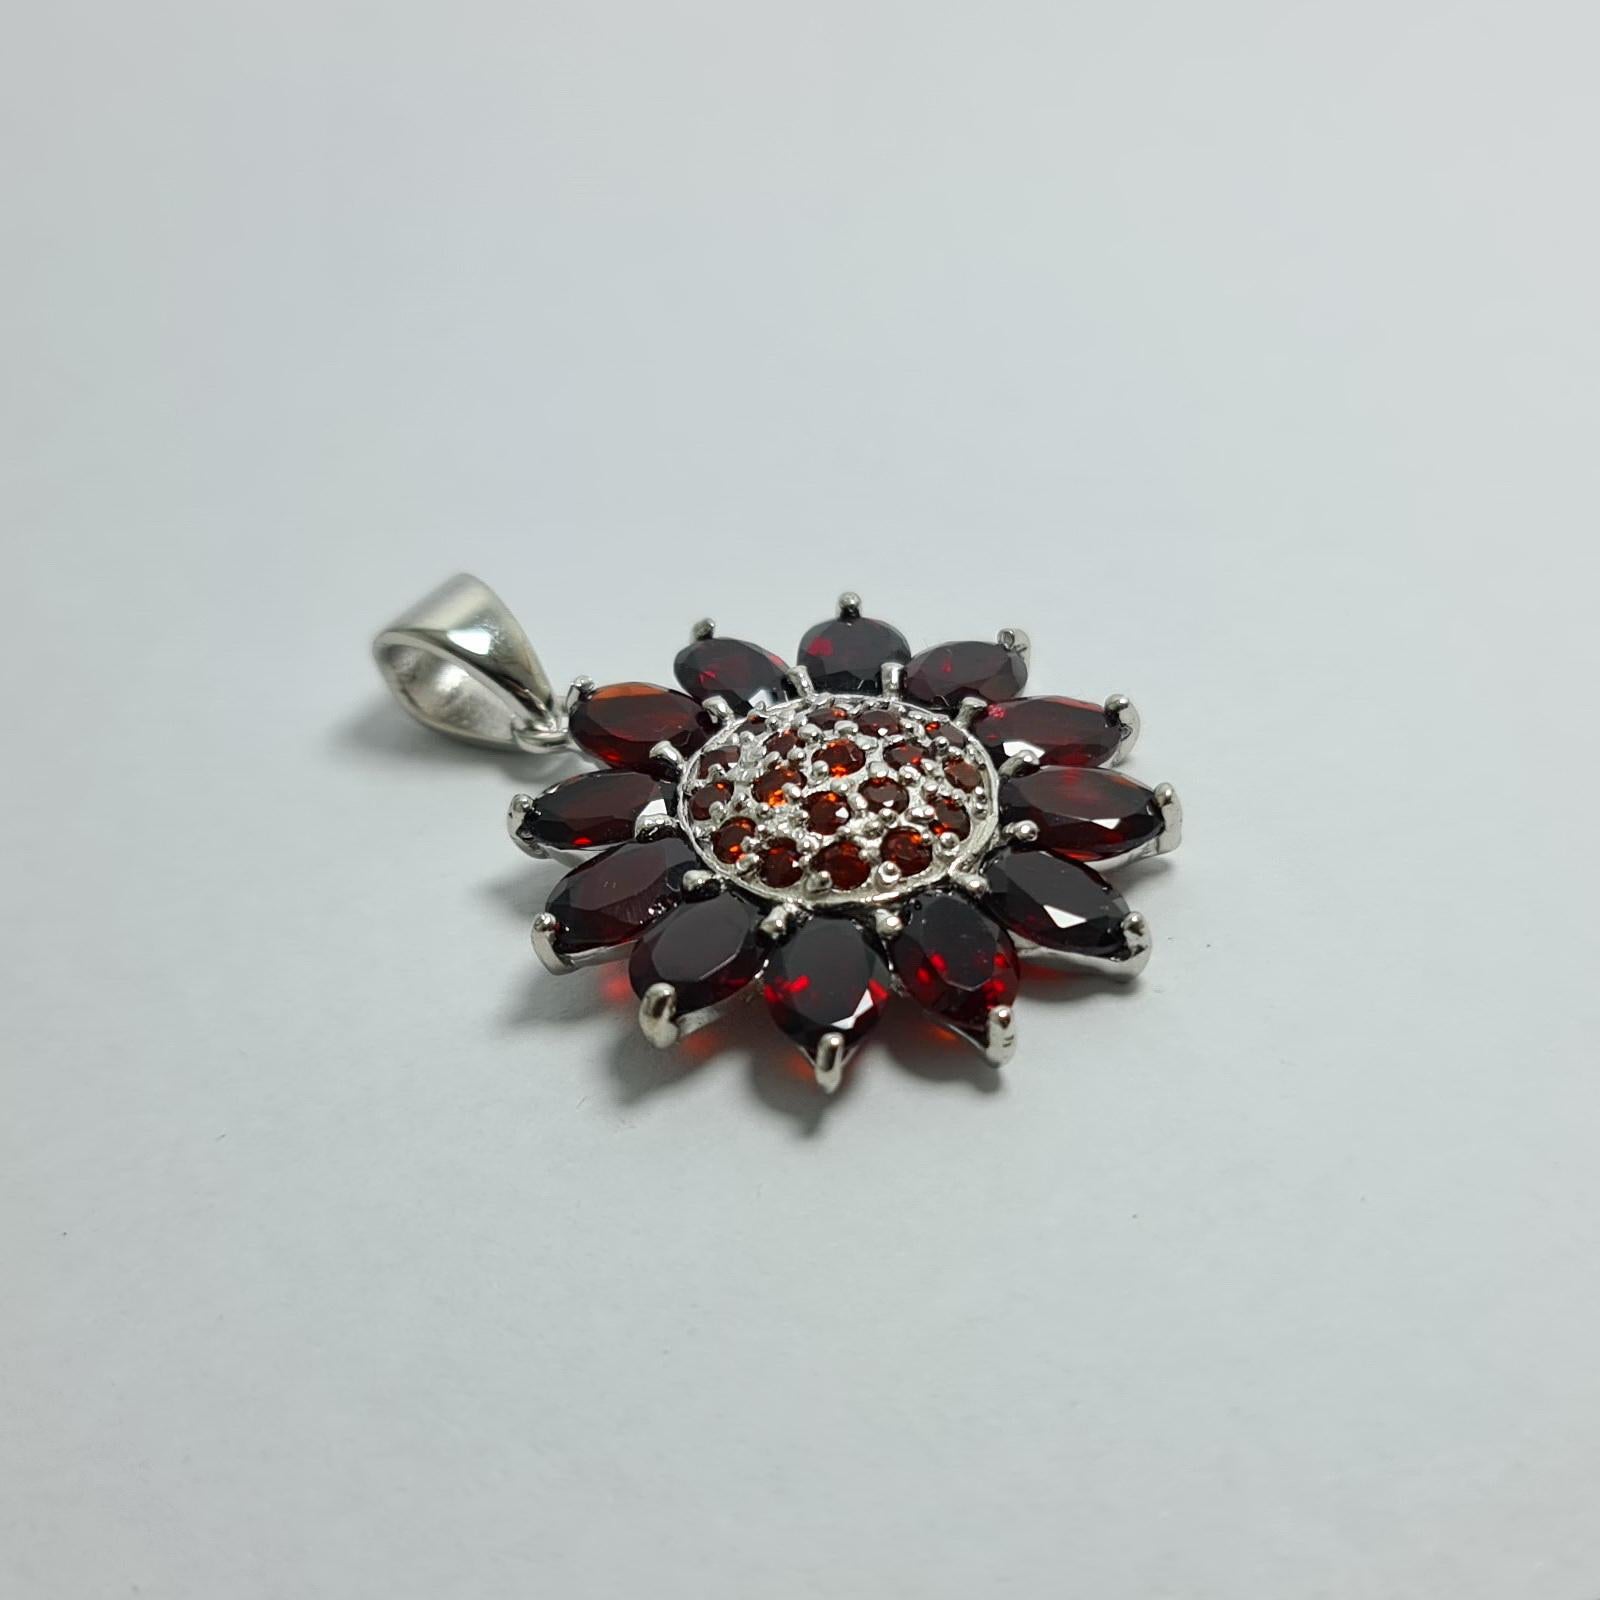 Natural Untreated Deep Red Garnet Solid Sterling Silver Rhodium Plated Sunflower Pendant 

Total weight of the pendant: 8.6 grams
Total weight of garnet: 8 carats

Please check other listings for matching sets 